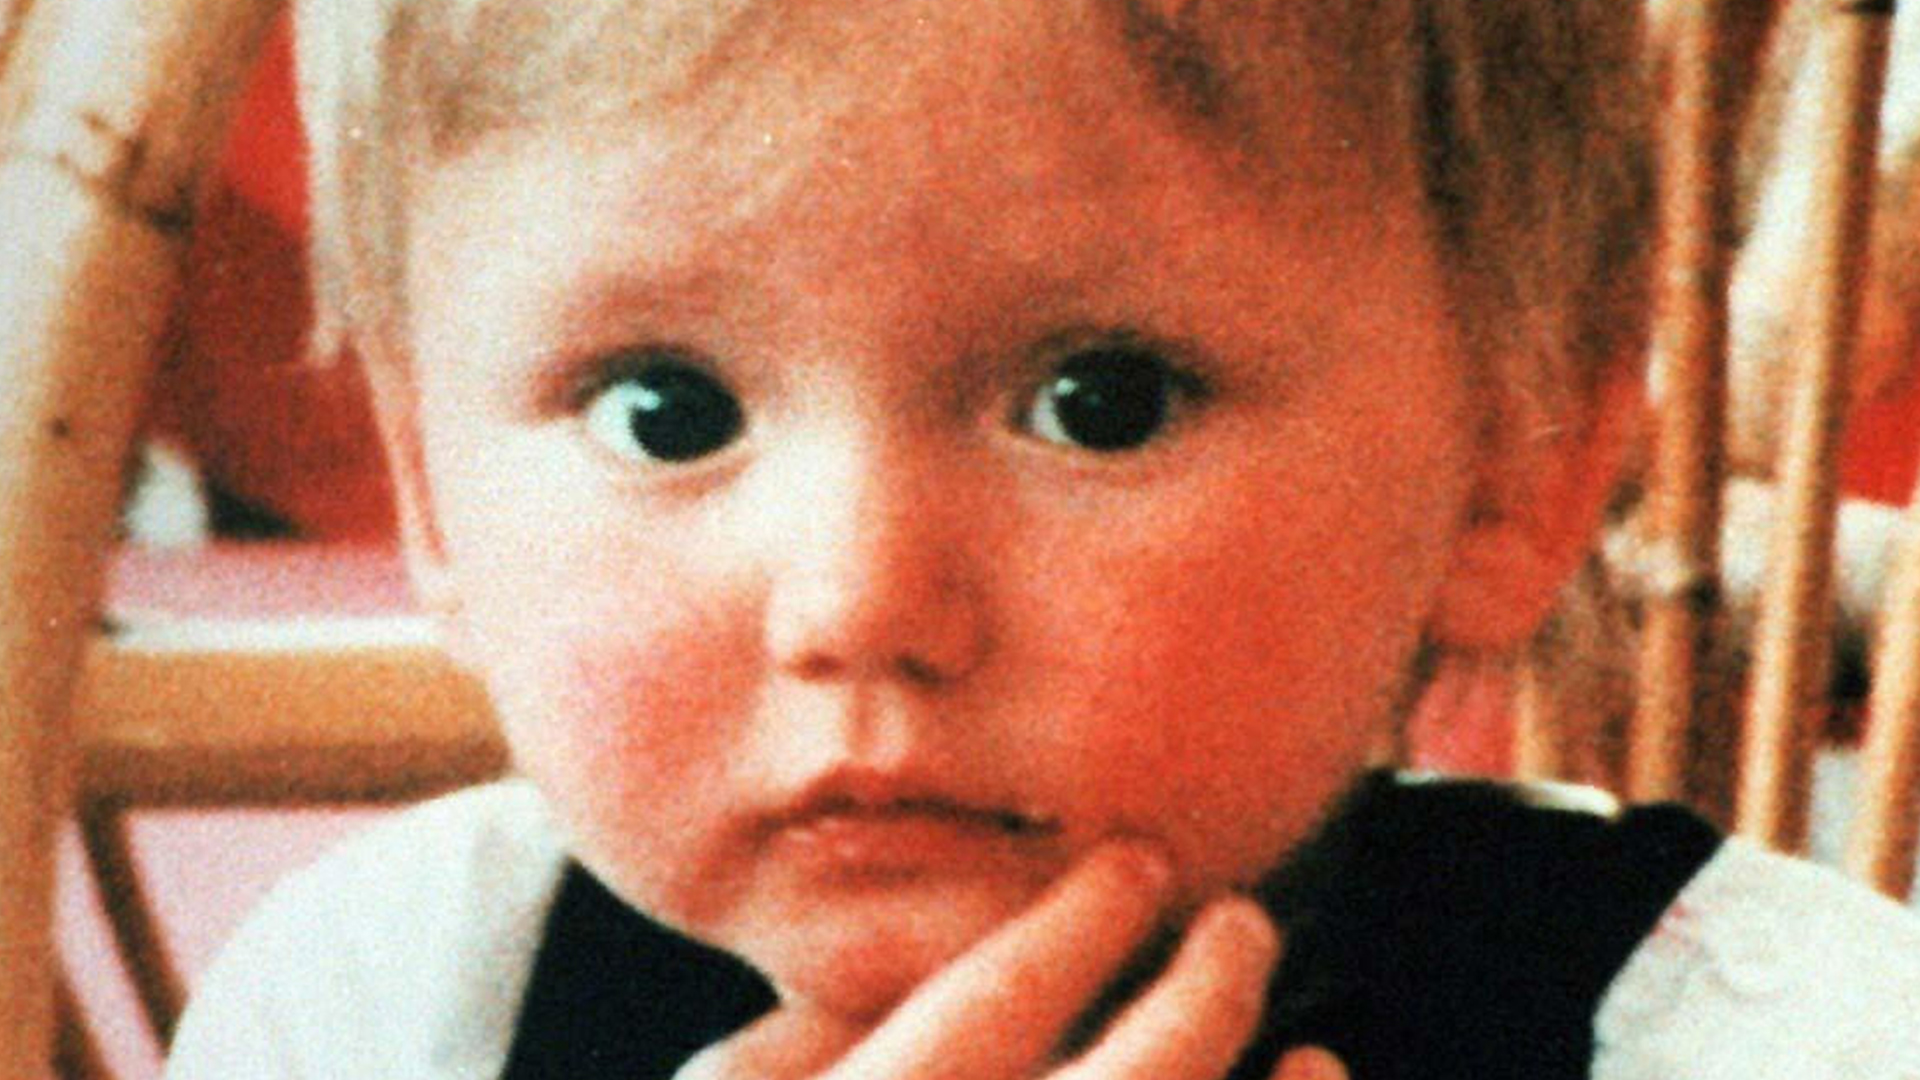 My son Ben Needham vanished on holiday – six sickening words from a prisoner could hold key to it all, mum Kerry says